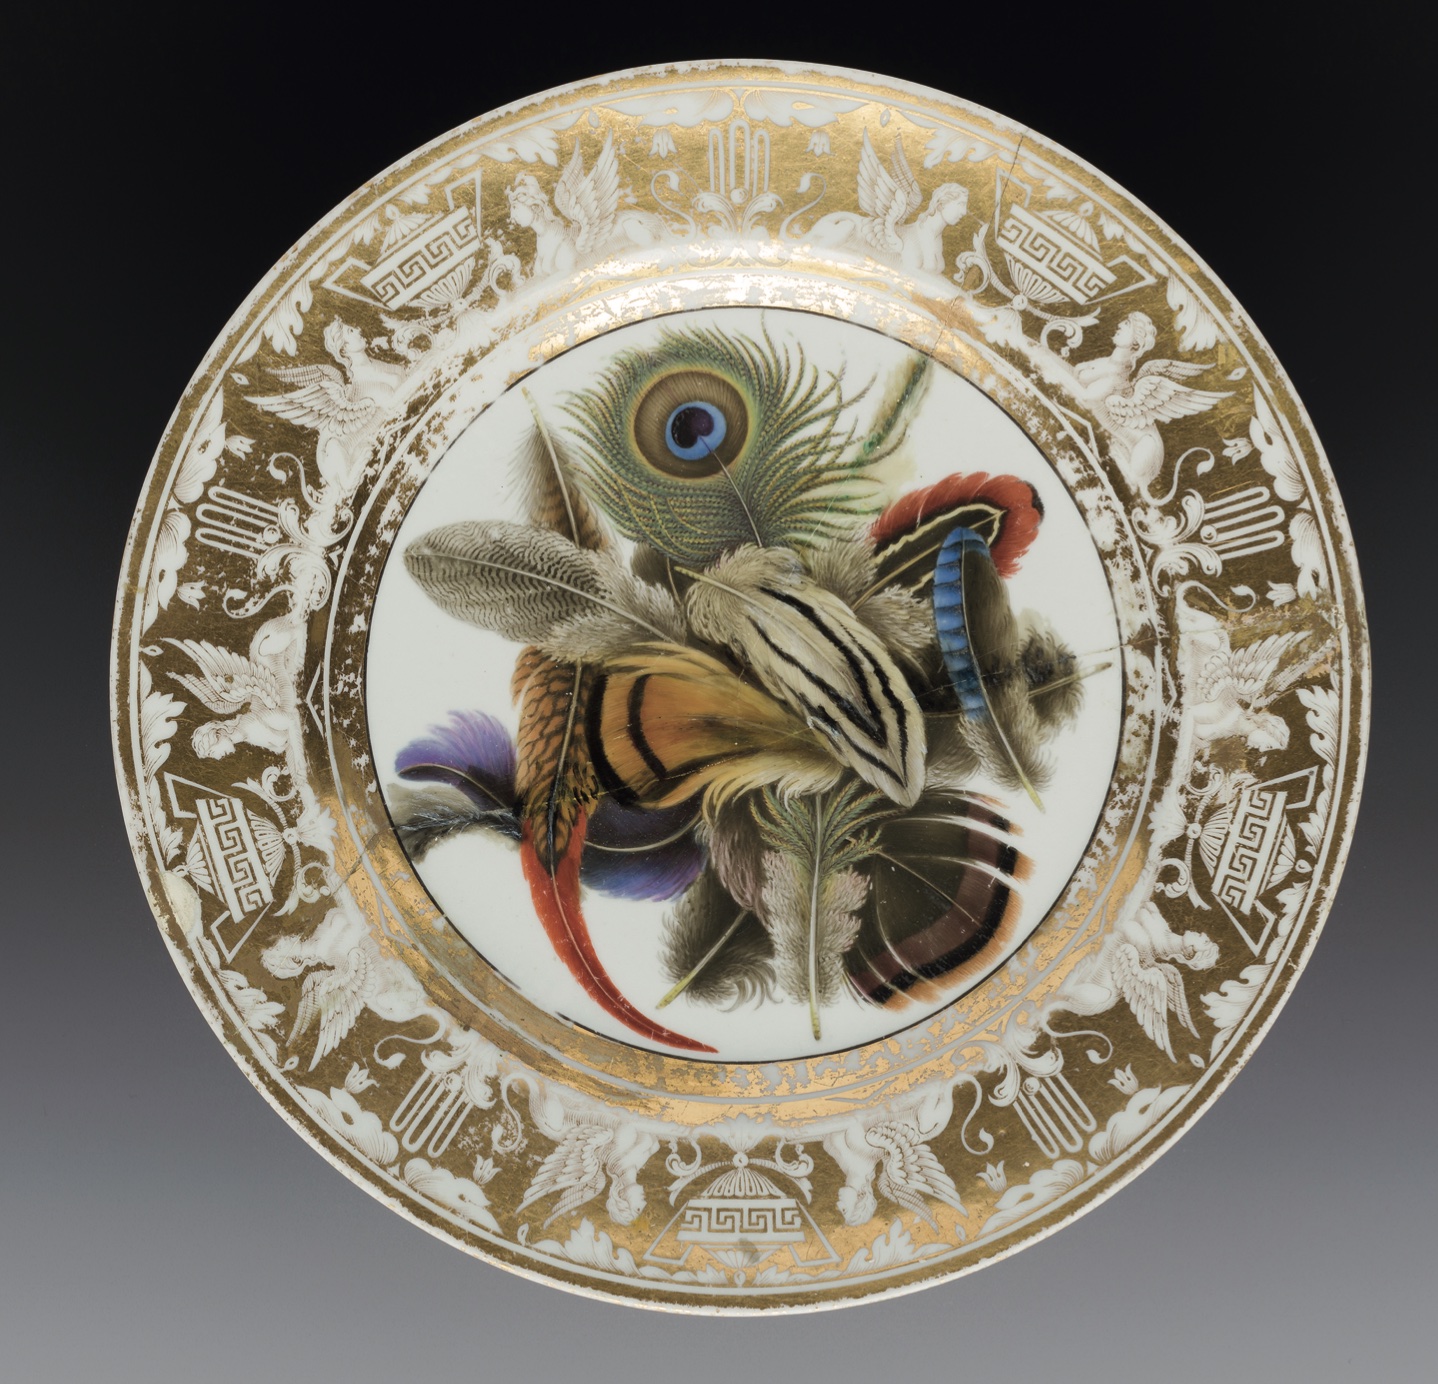 A ceramic plate from Flight and Barr